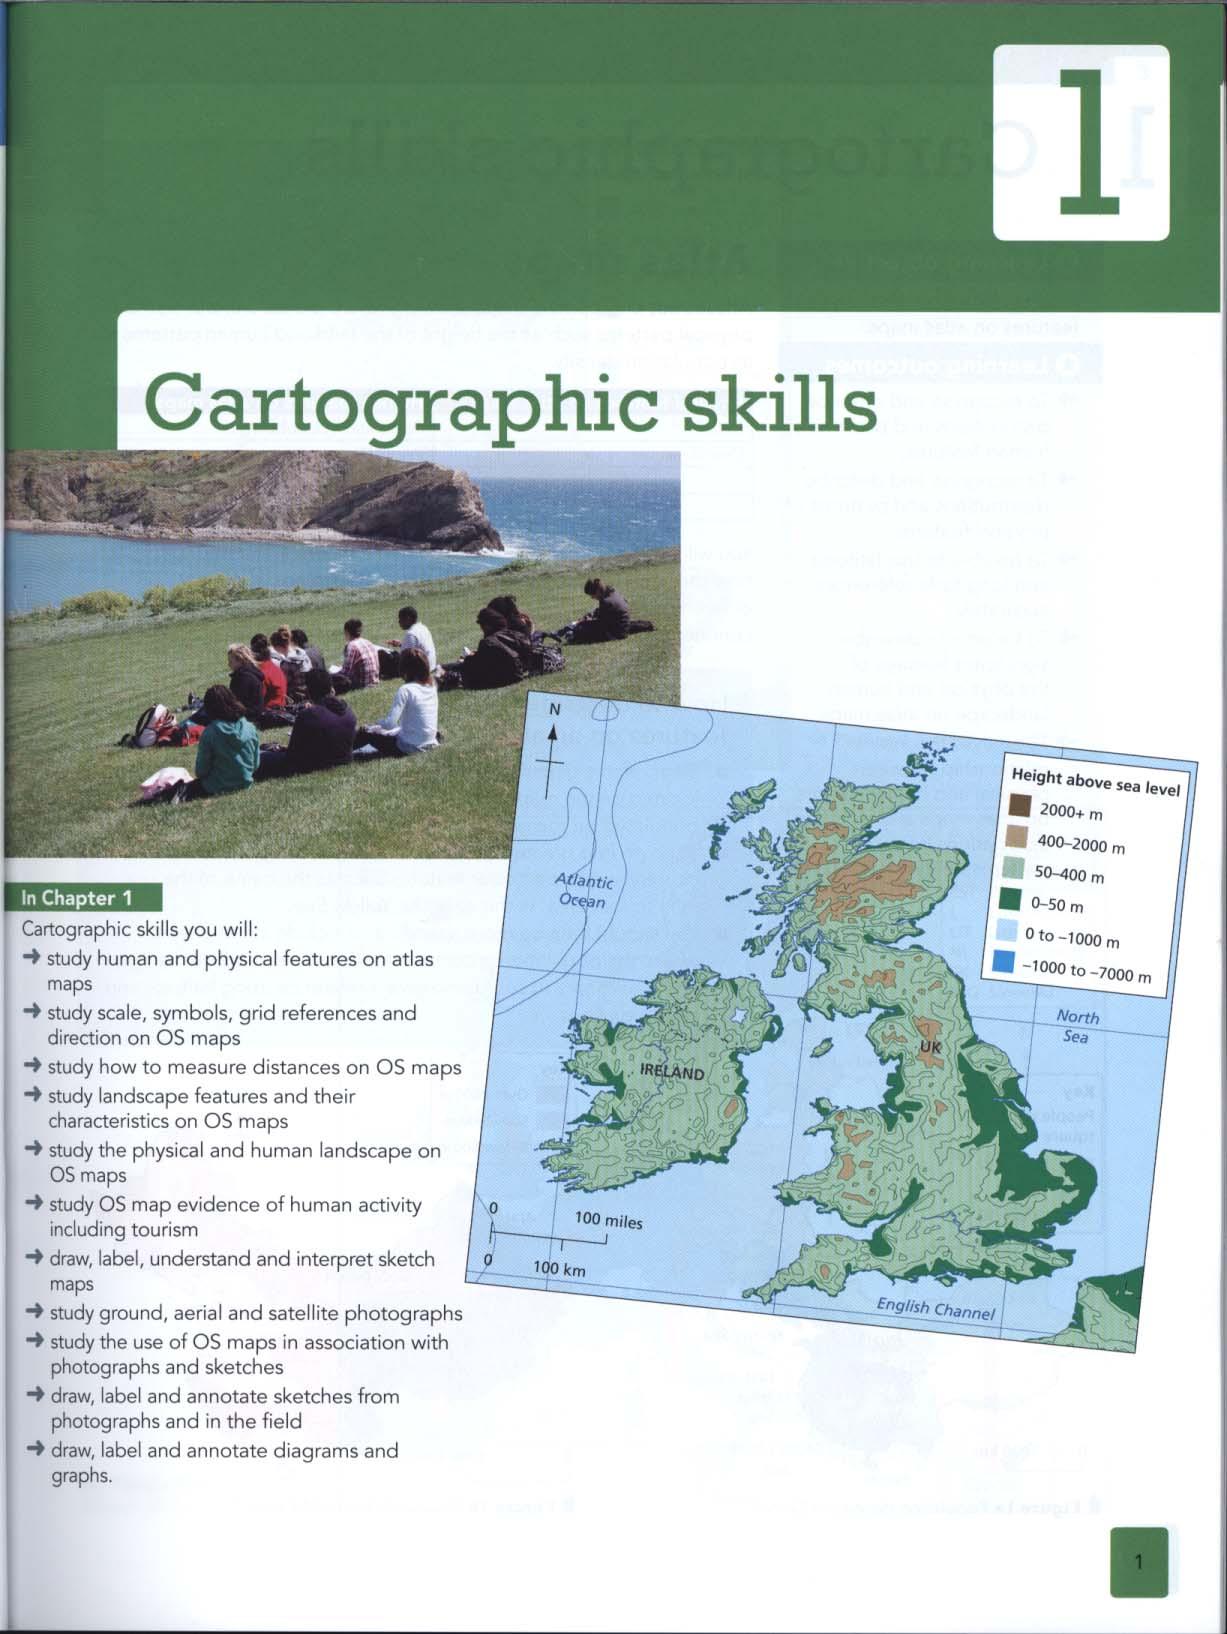 Geographical Skills and Fieldwork for AQA GCSE (9-1) Geograp